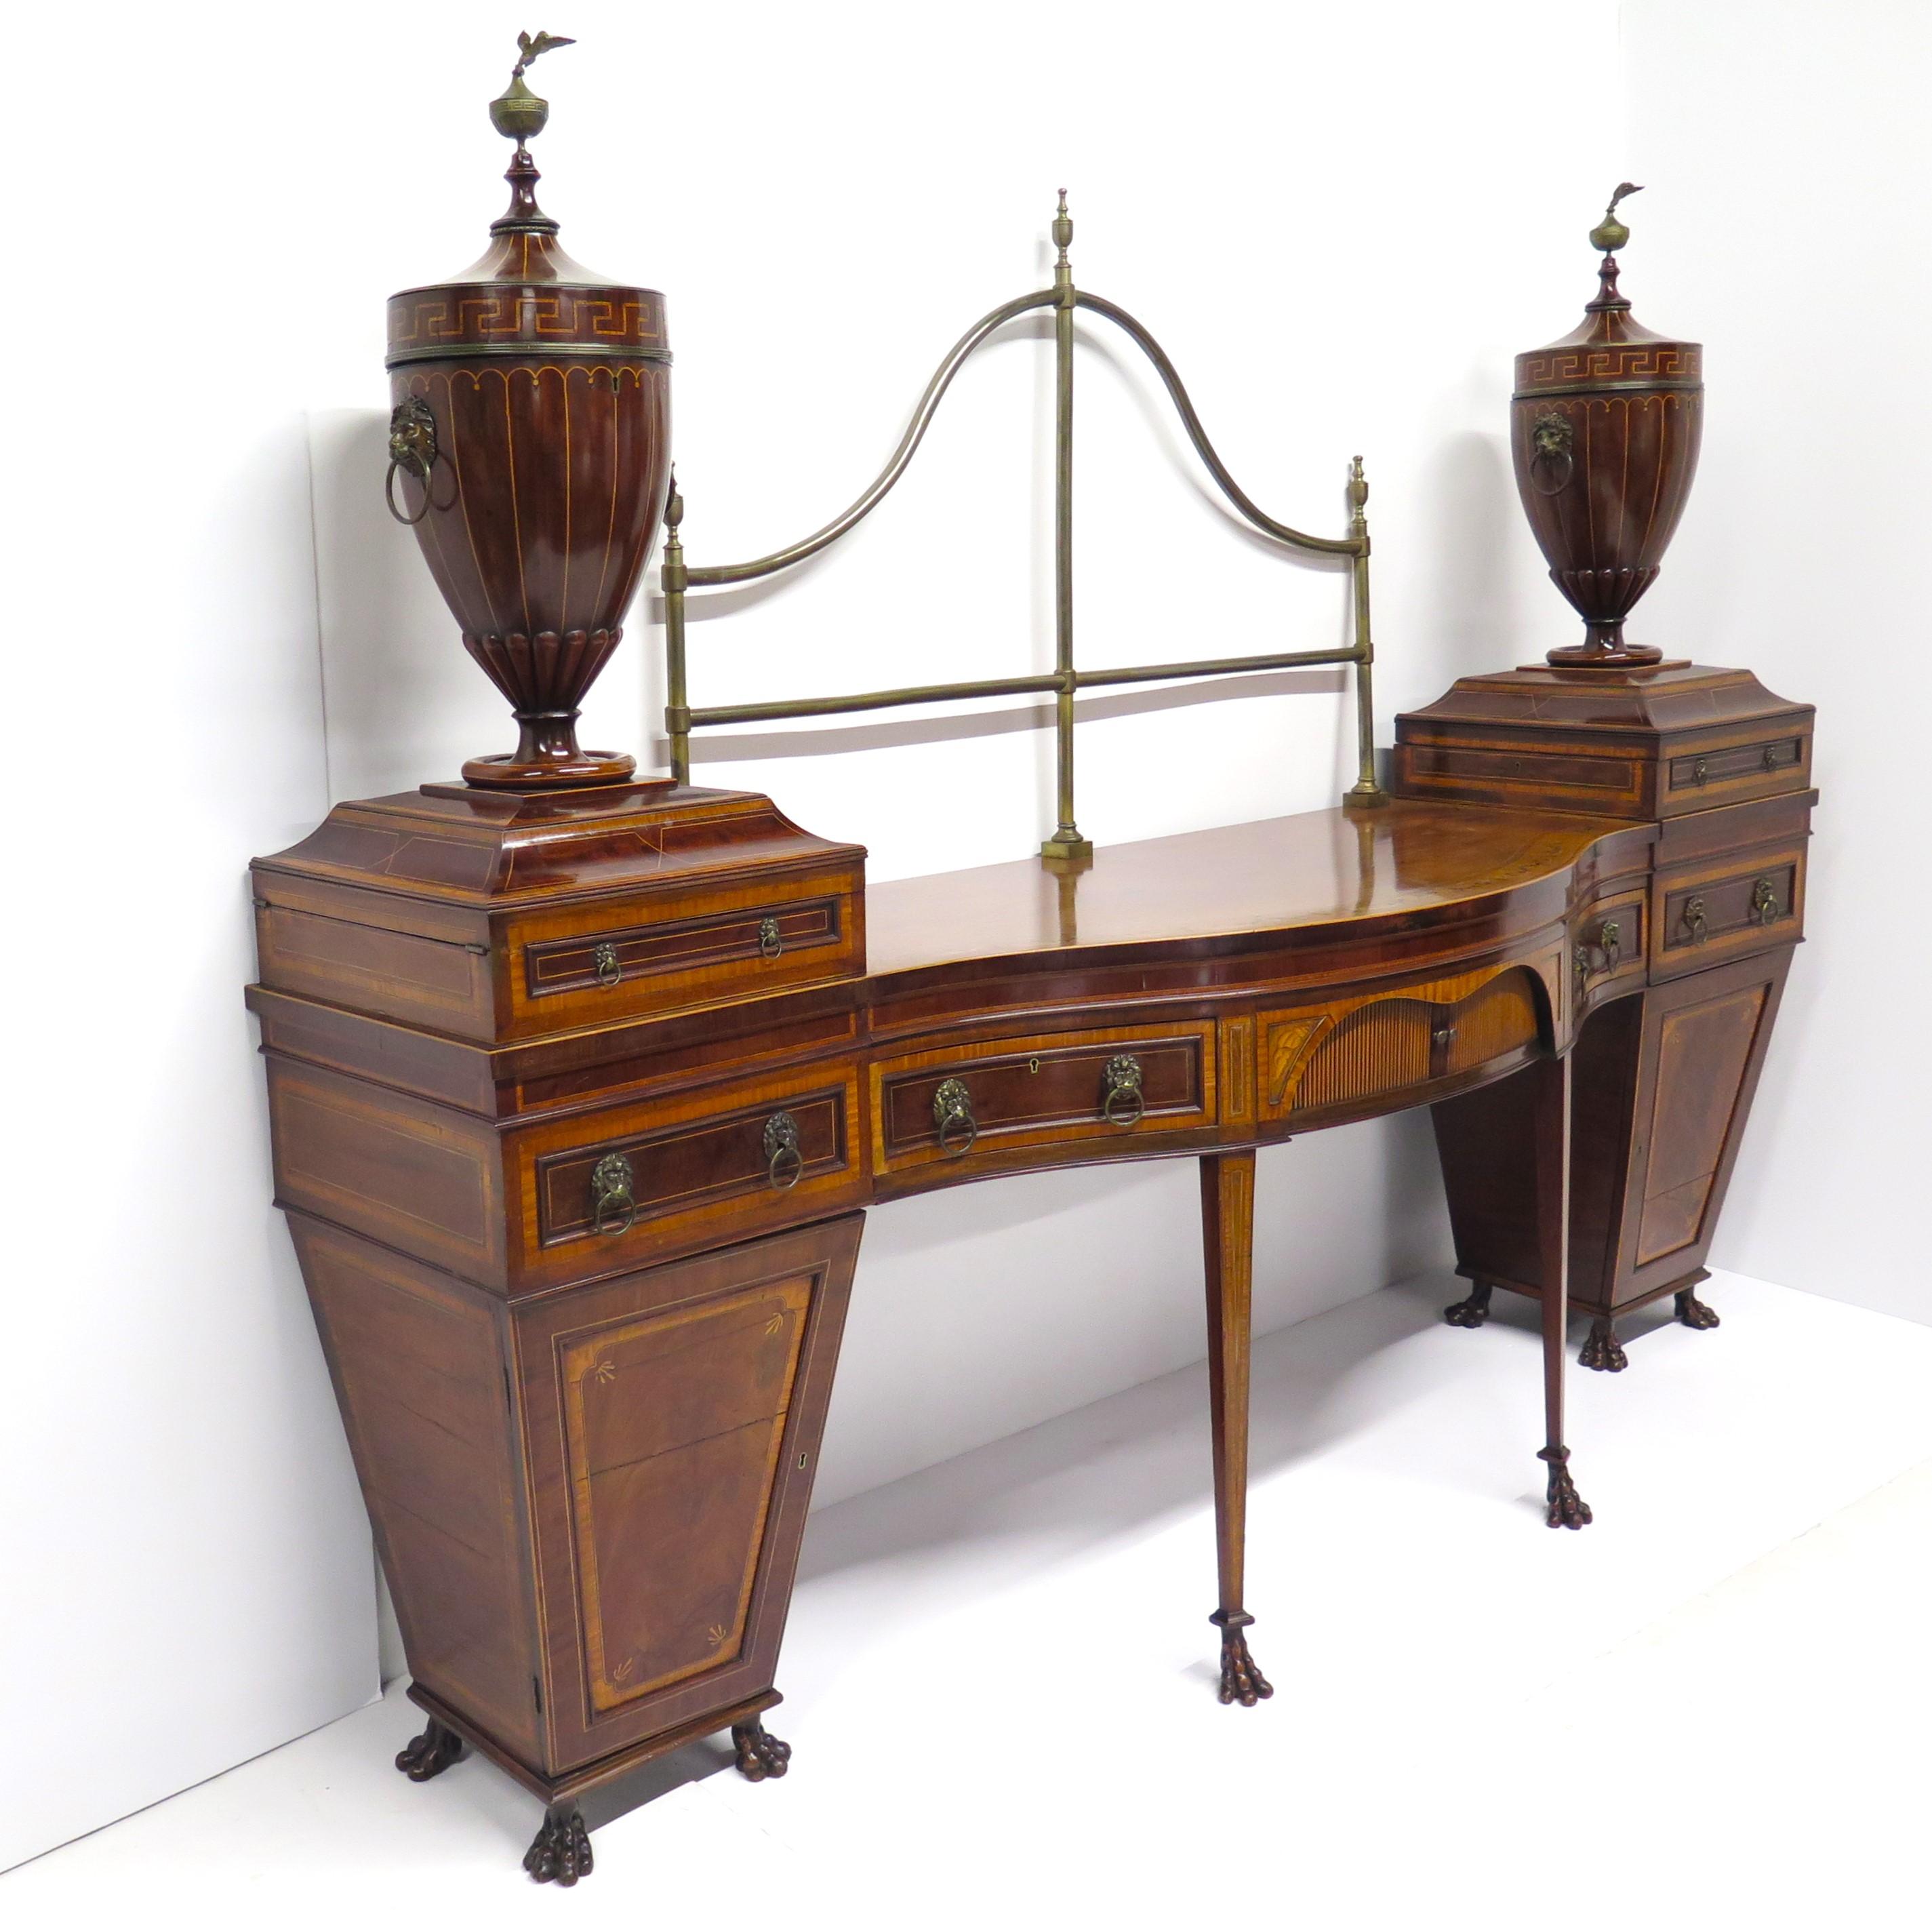 An exceptional Georgian revival mahogany sideboard with arched back brass railing, sideboard is of rectangular form with bow front and faded mahogany top with marquetry of bows and swags, twin pedestals of satinwood crossbanding with ebony and